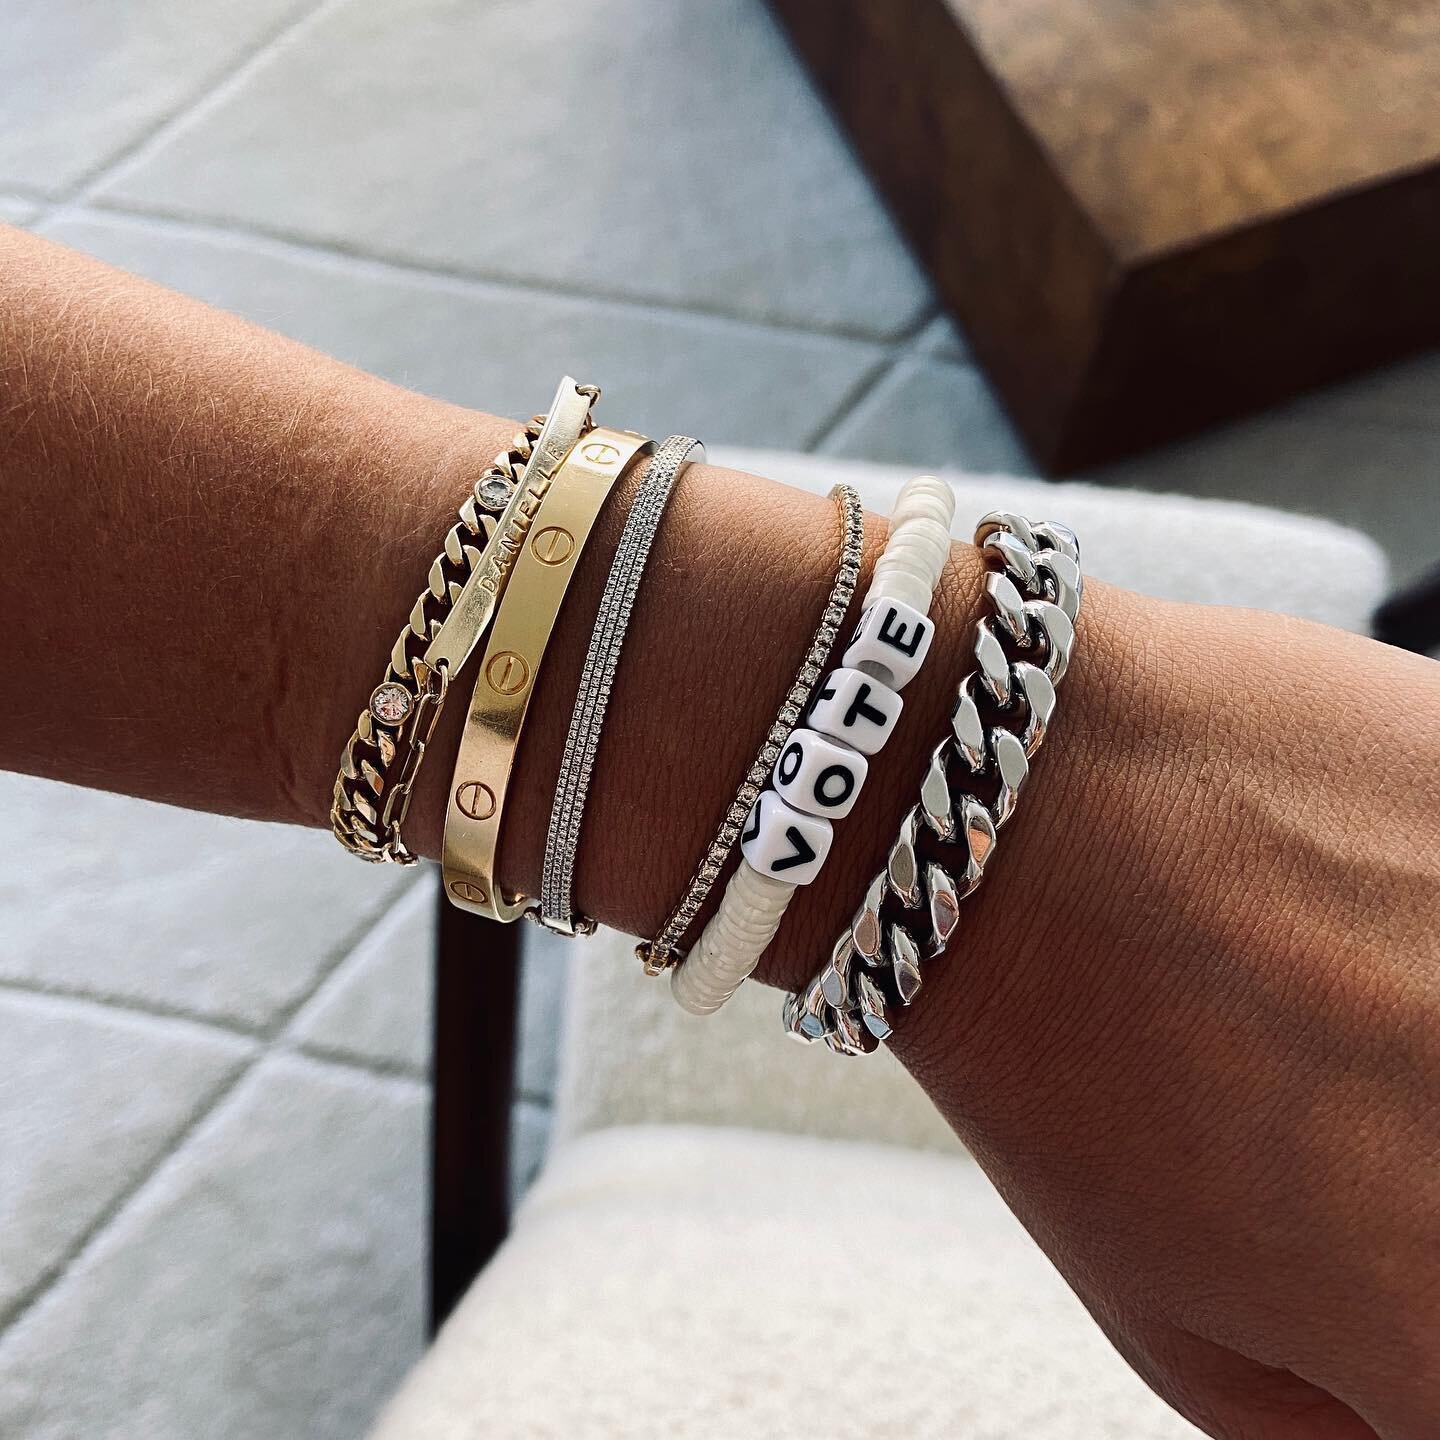 So many of you loved the VOTE bracelet that @weworewhat wore yesterday so we want to share more about the two sisters behind it! @hiddengemny is a sister-owned small business featuring multi-cultural products made by local artisans as well as handmad